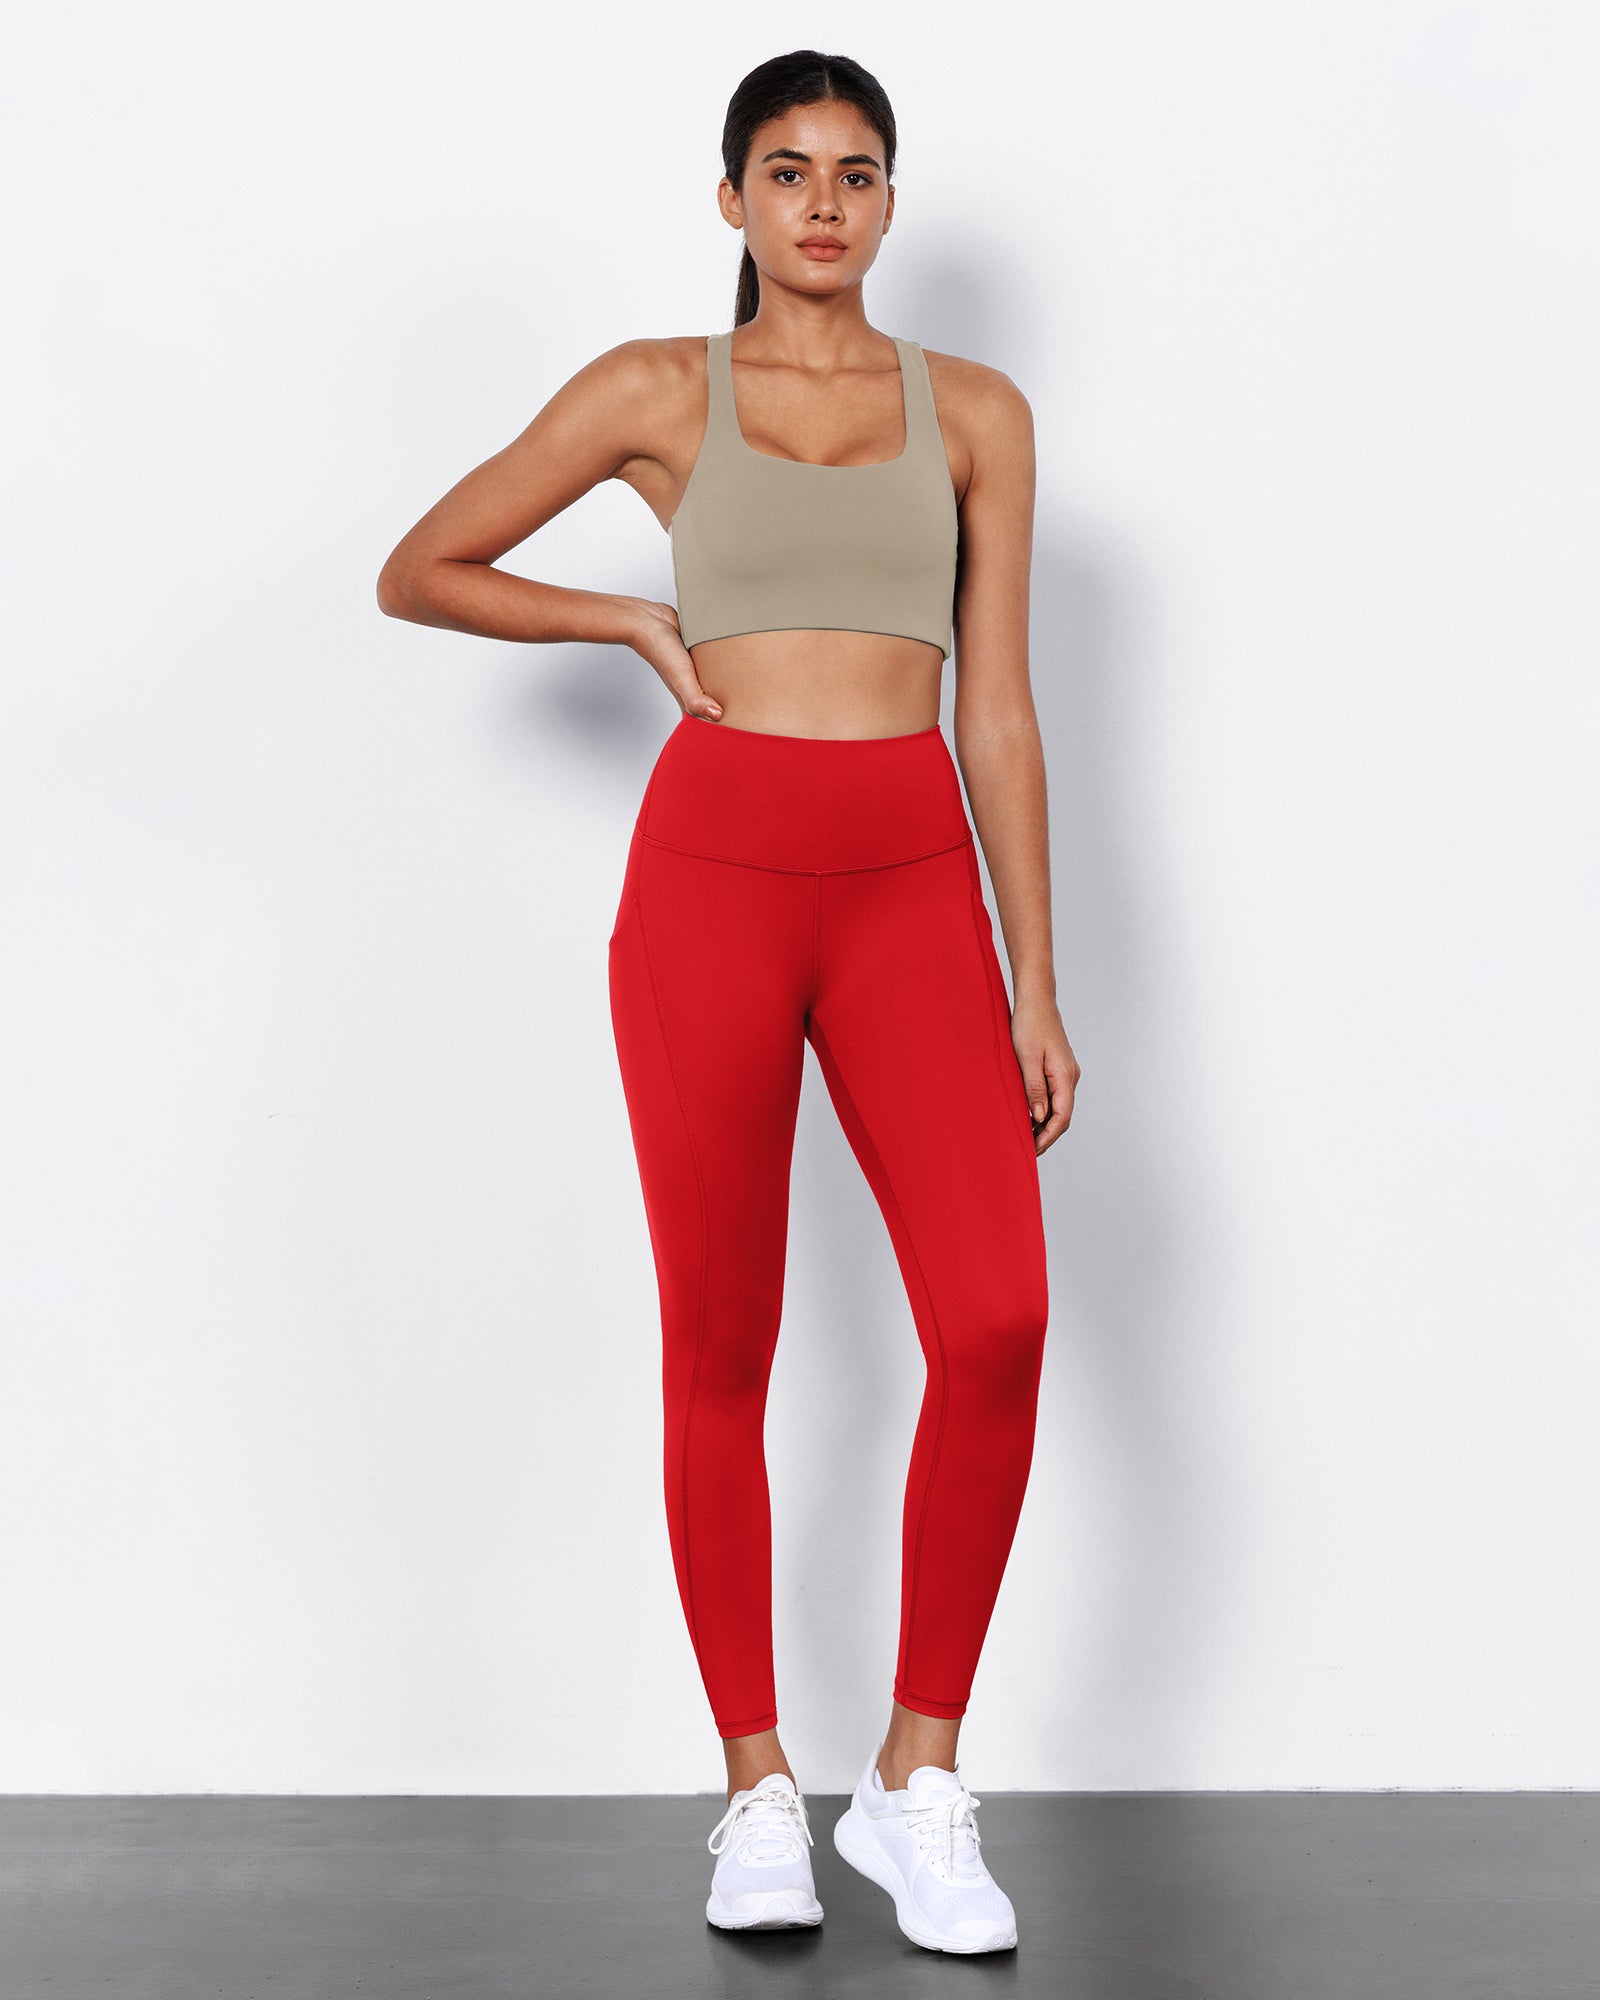 2-Pack 7/8 High Waist Workout Leggings with Pockets Black+Red - ododos